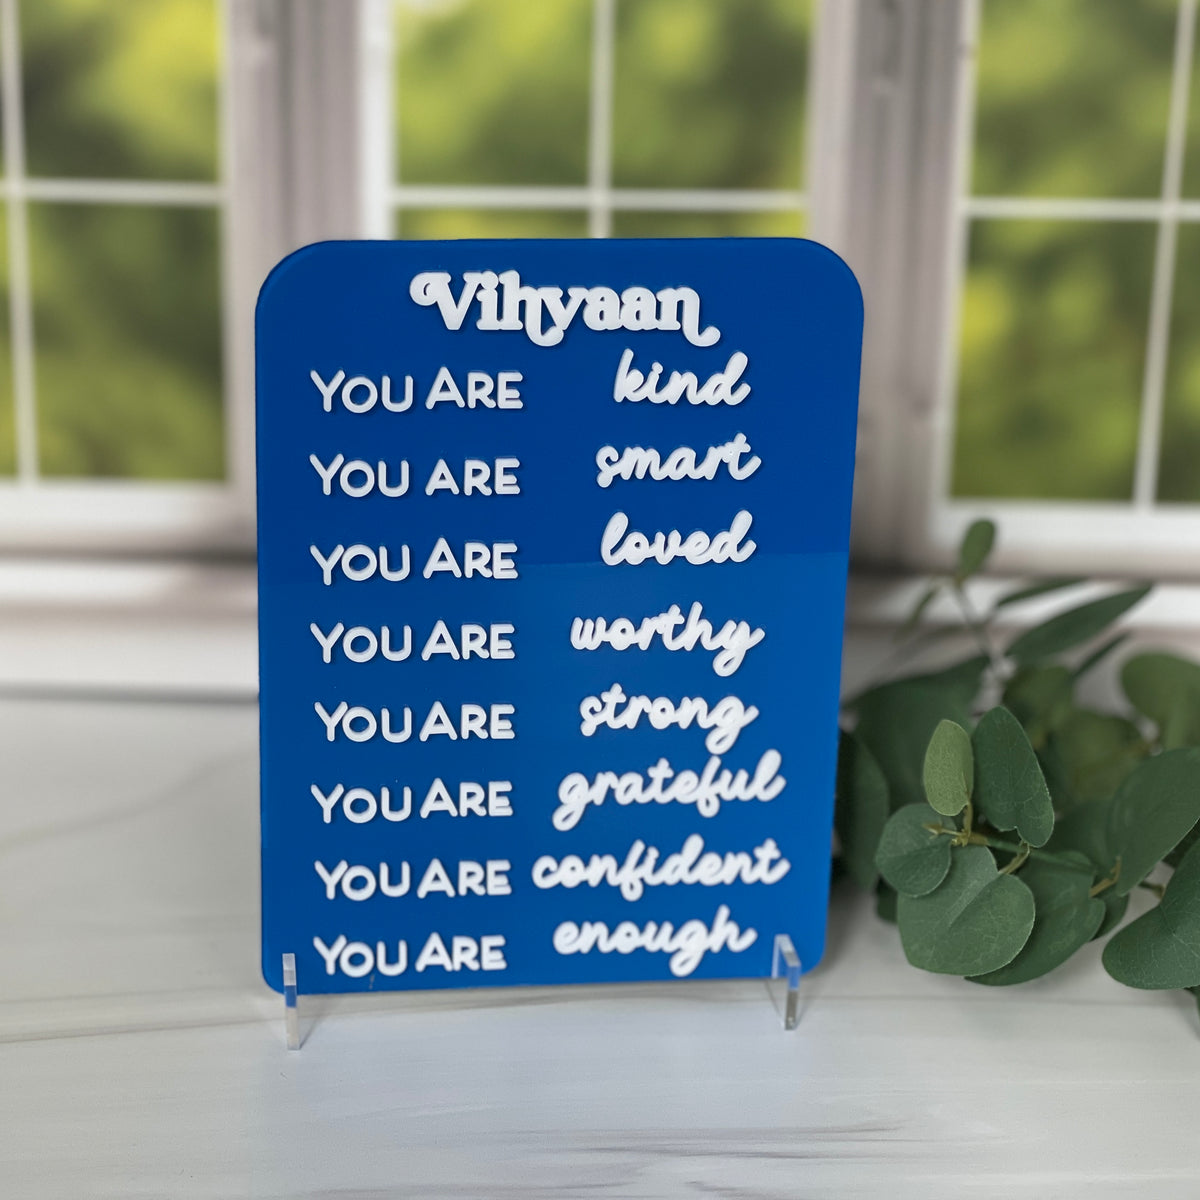 You are kind affirmation acrylic sign for kids